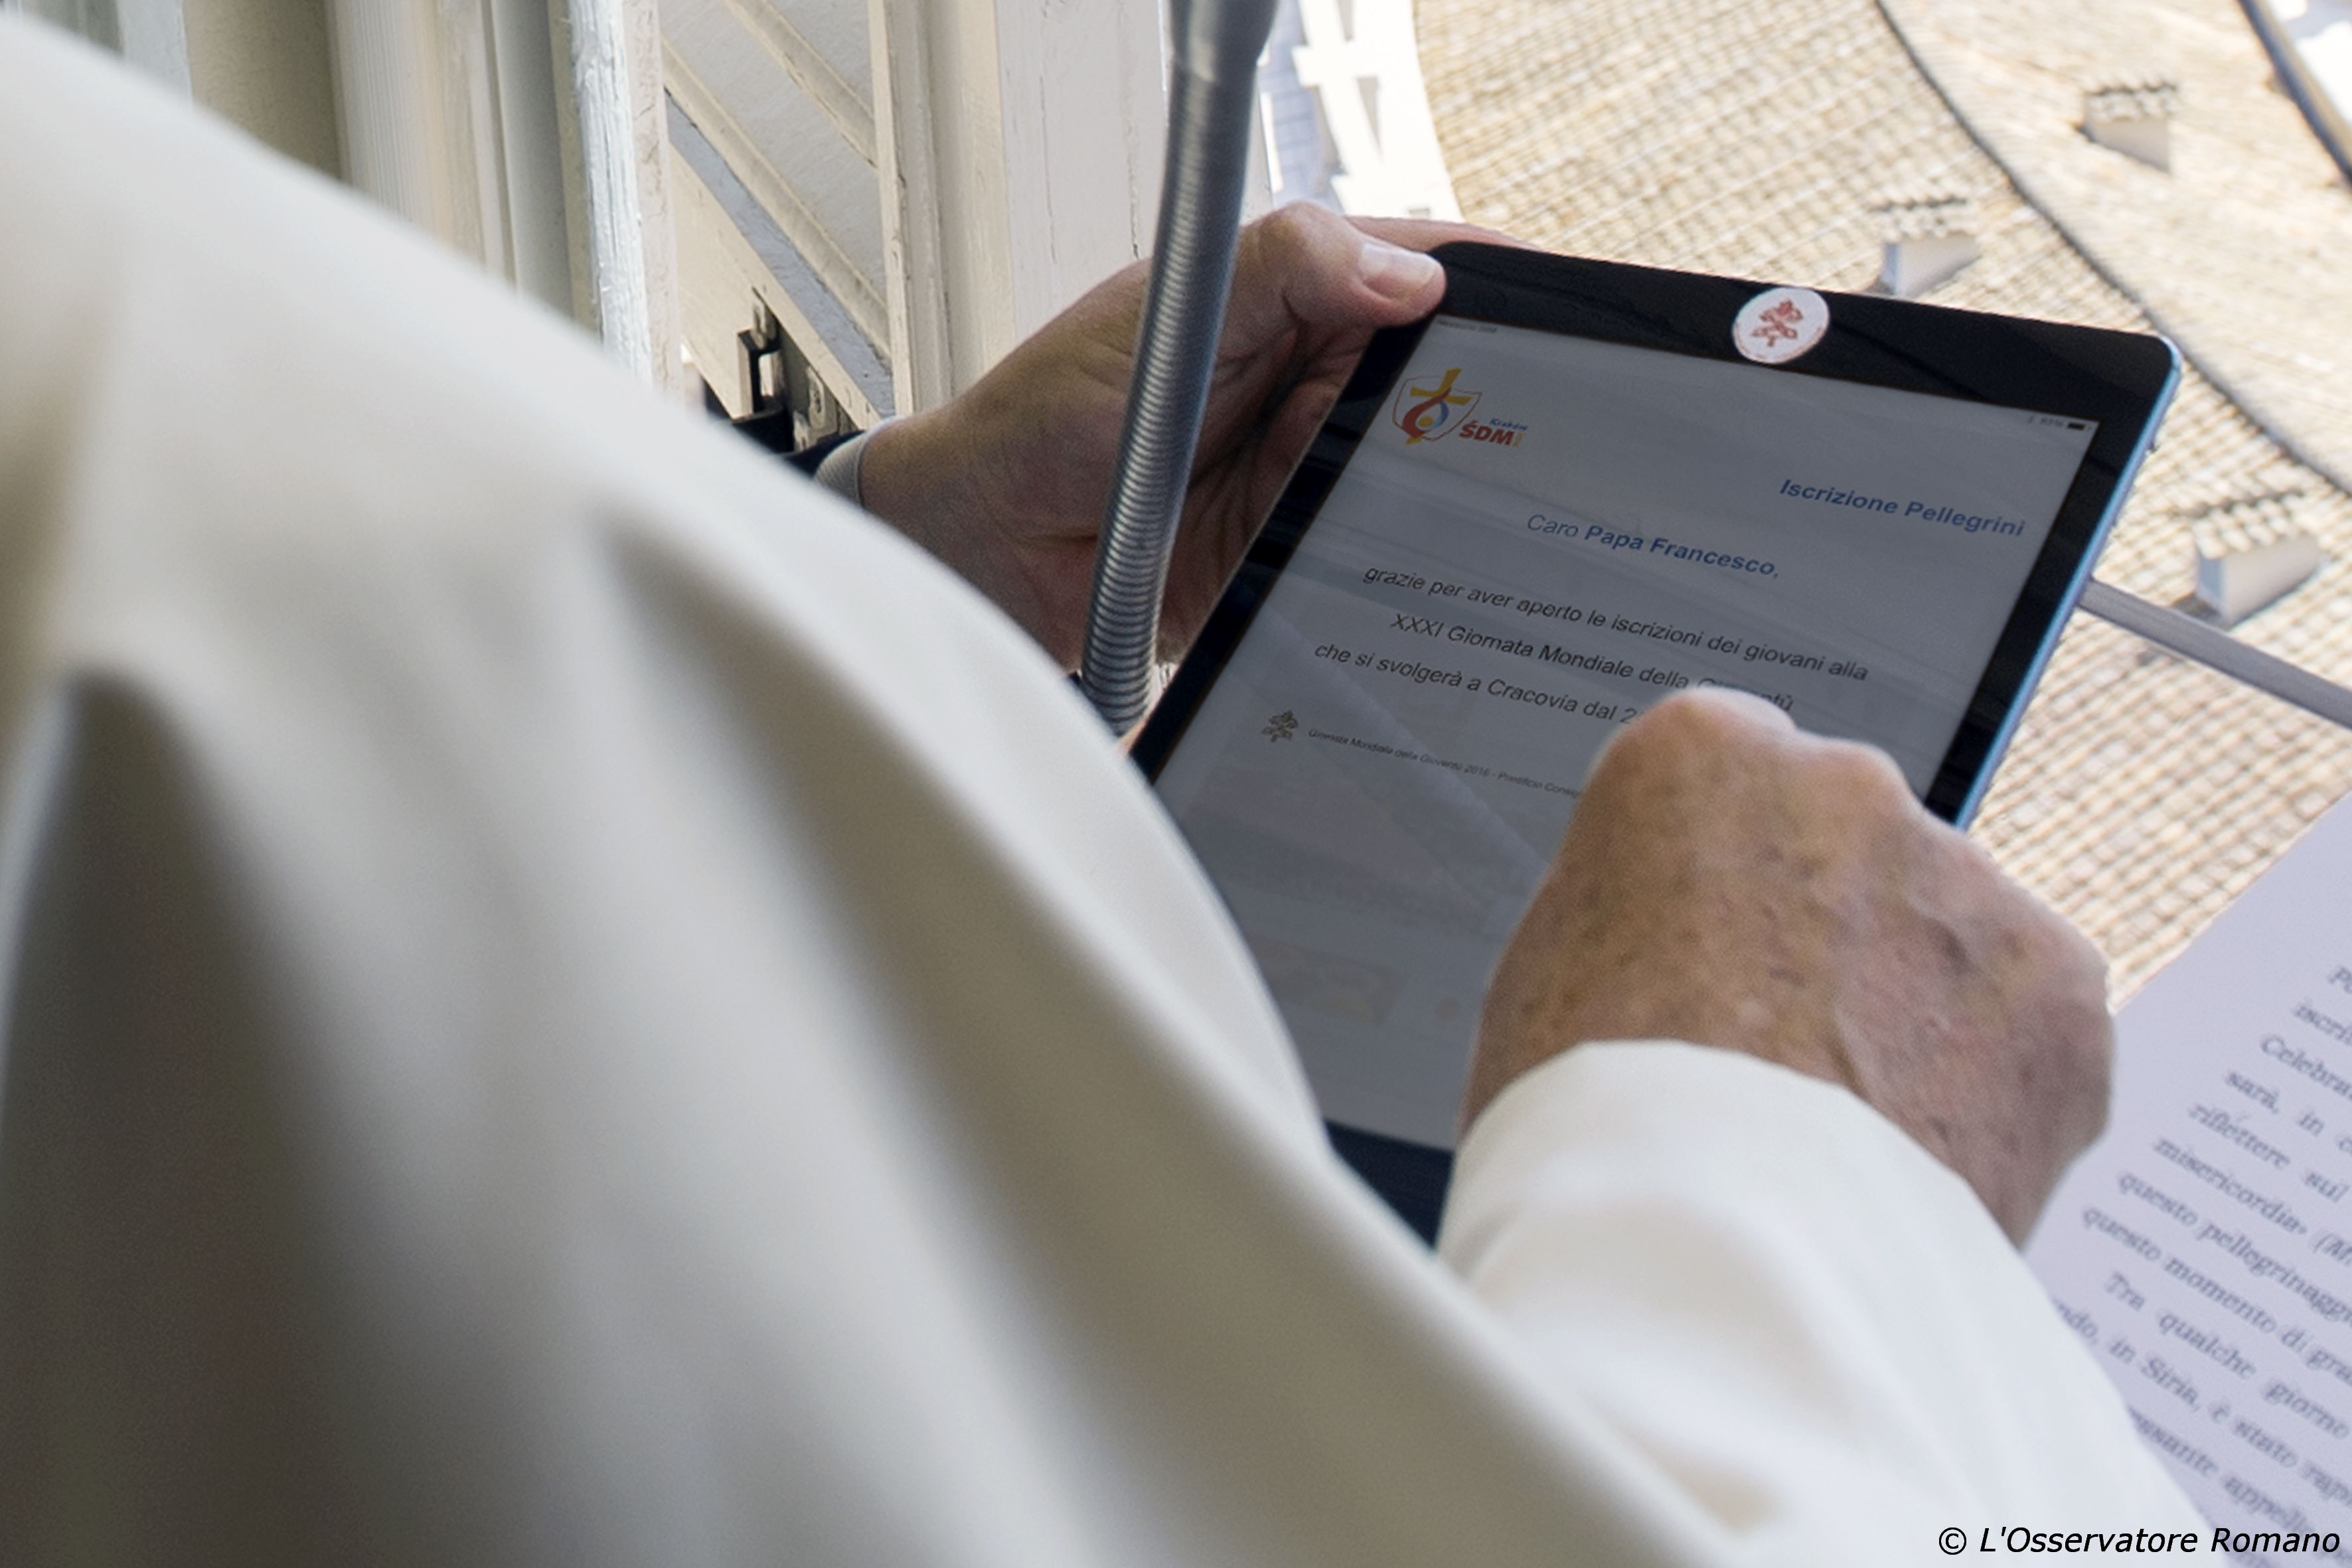 Pope Francis registers himself through a tablet as a pilgrim to the 2016 World Youth Day in Poland